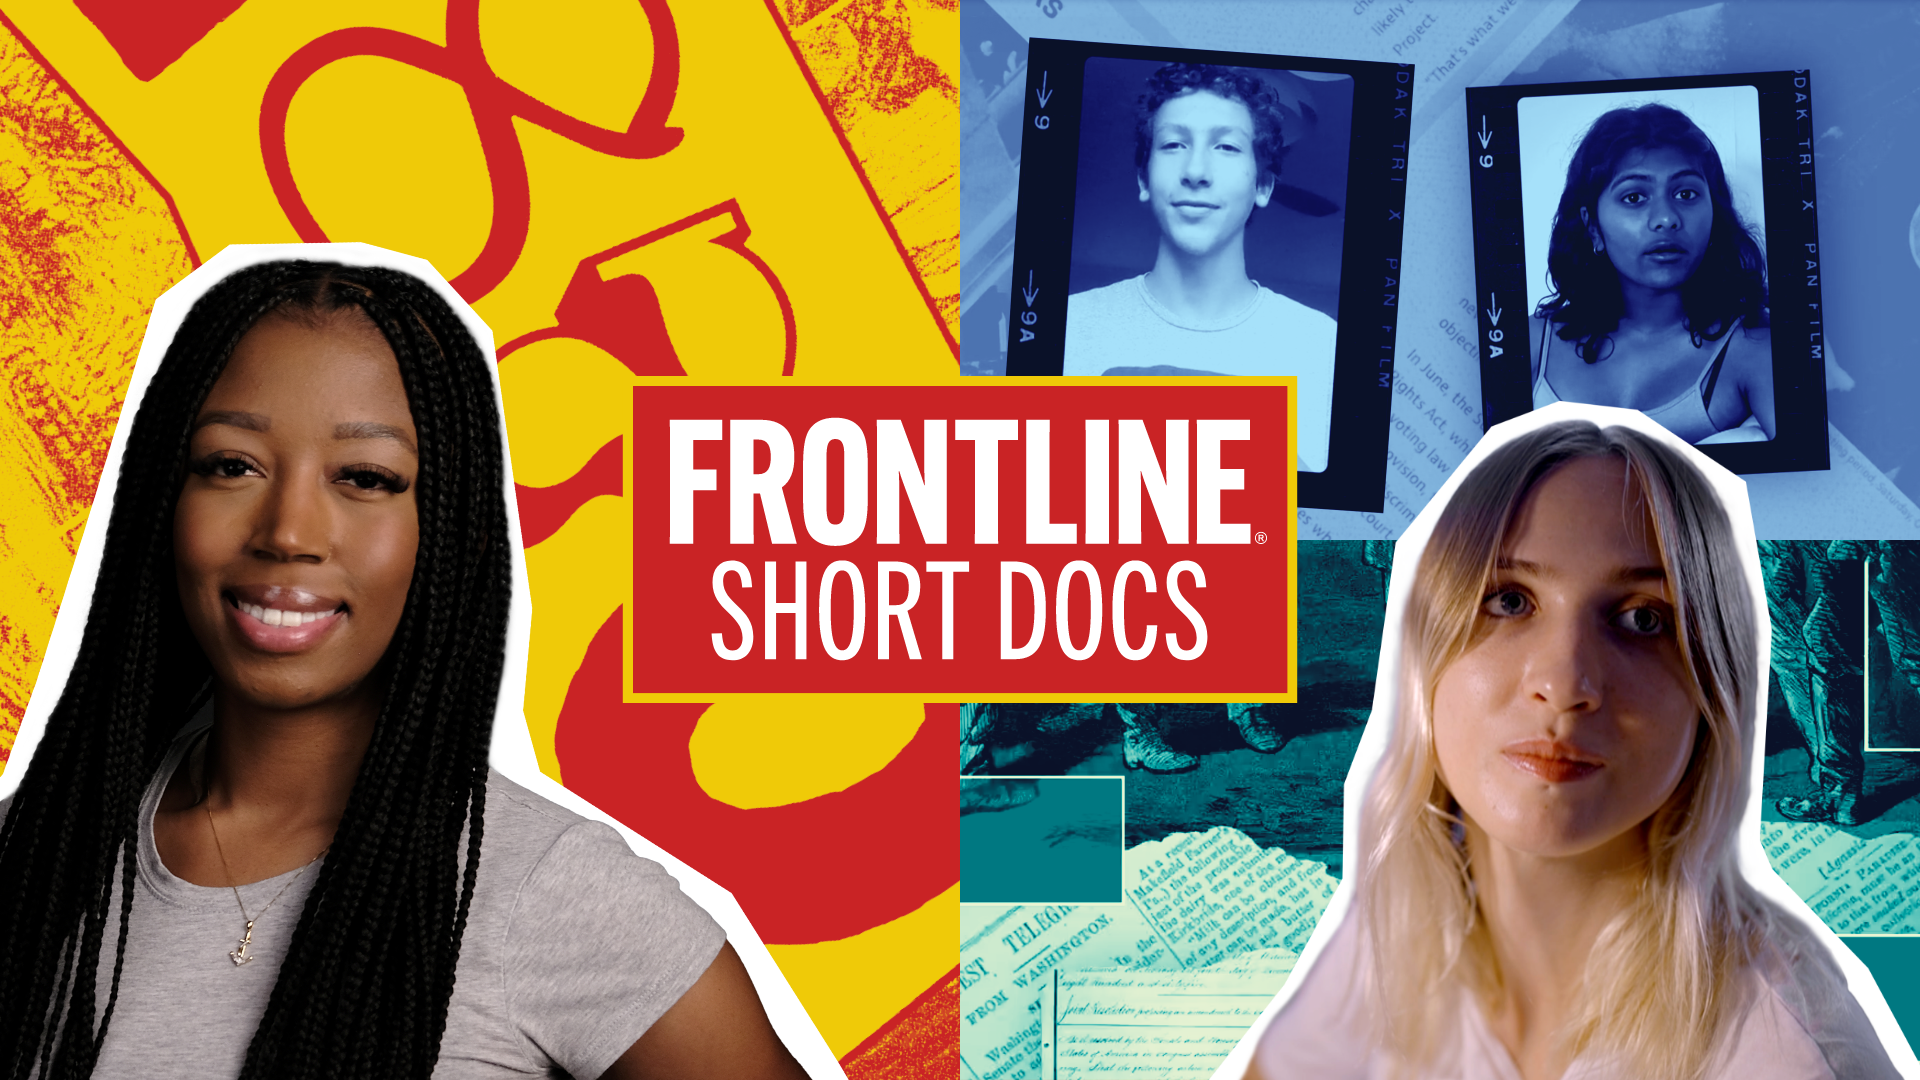 Promotional graphic for 'FRONTLINE Short Docs' featuring a vibrant yellow and red background with abstract designs. The foreground displays three portraits: a woman with long braids smiling, a young man in a monochrome film frame, and a woman with blonde hair. The backdrop includes various layered visuals like film negatives and handwritten notes in faded blue tones."